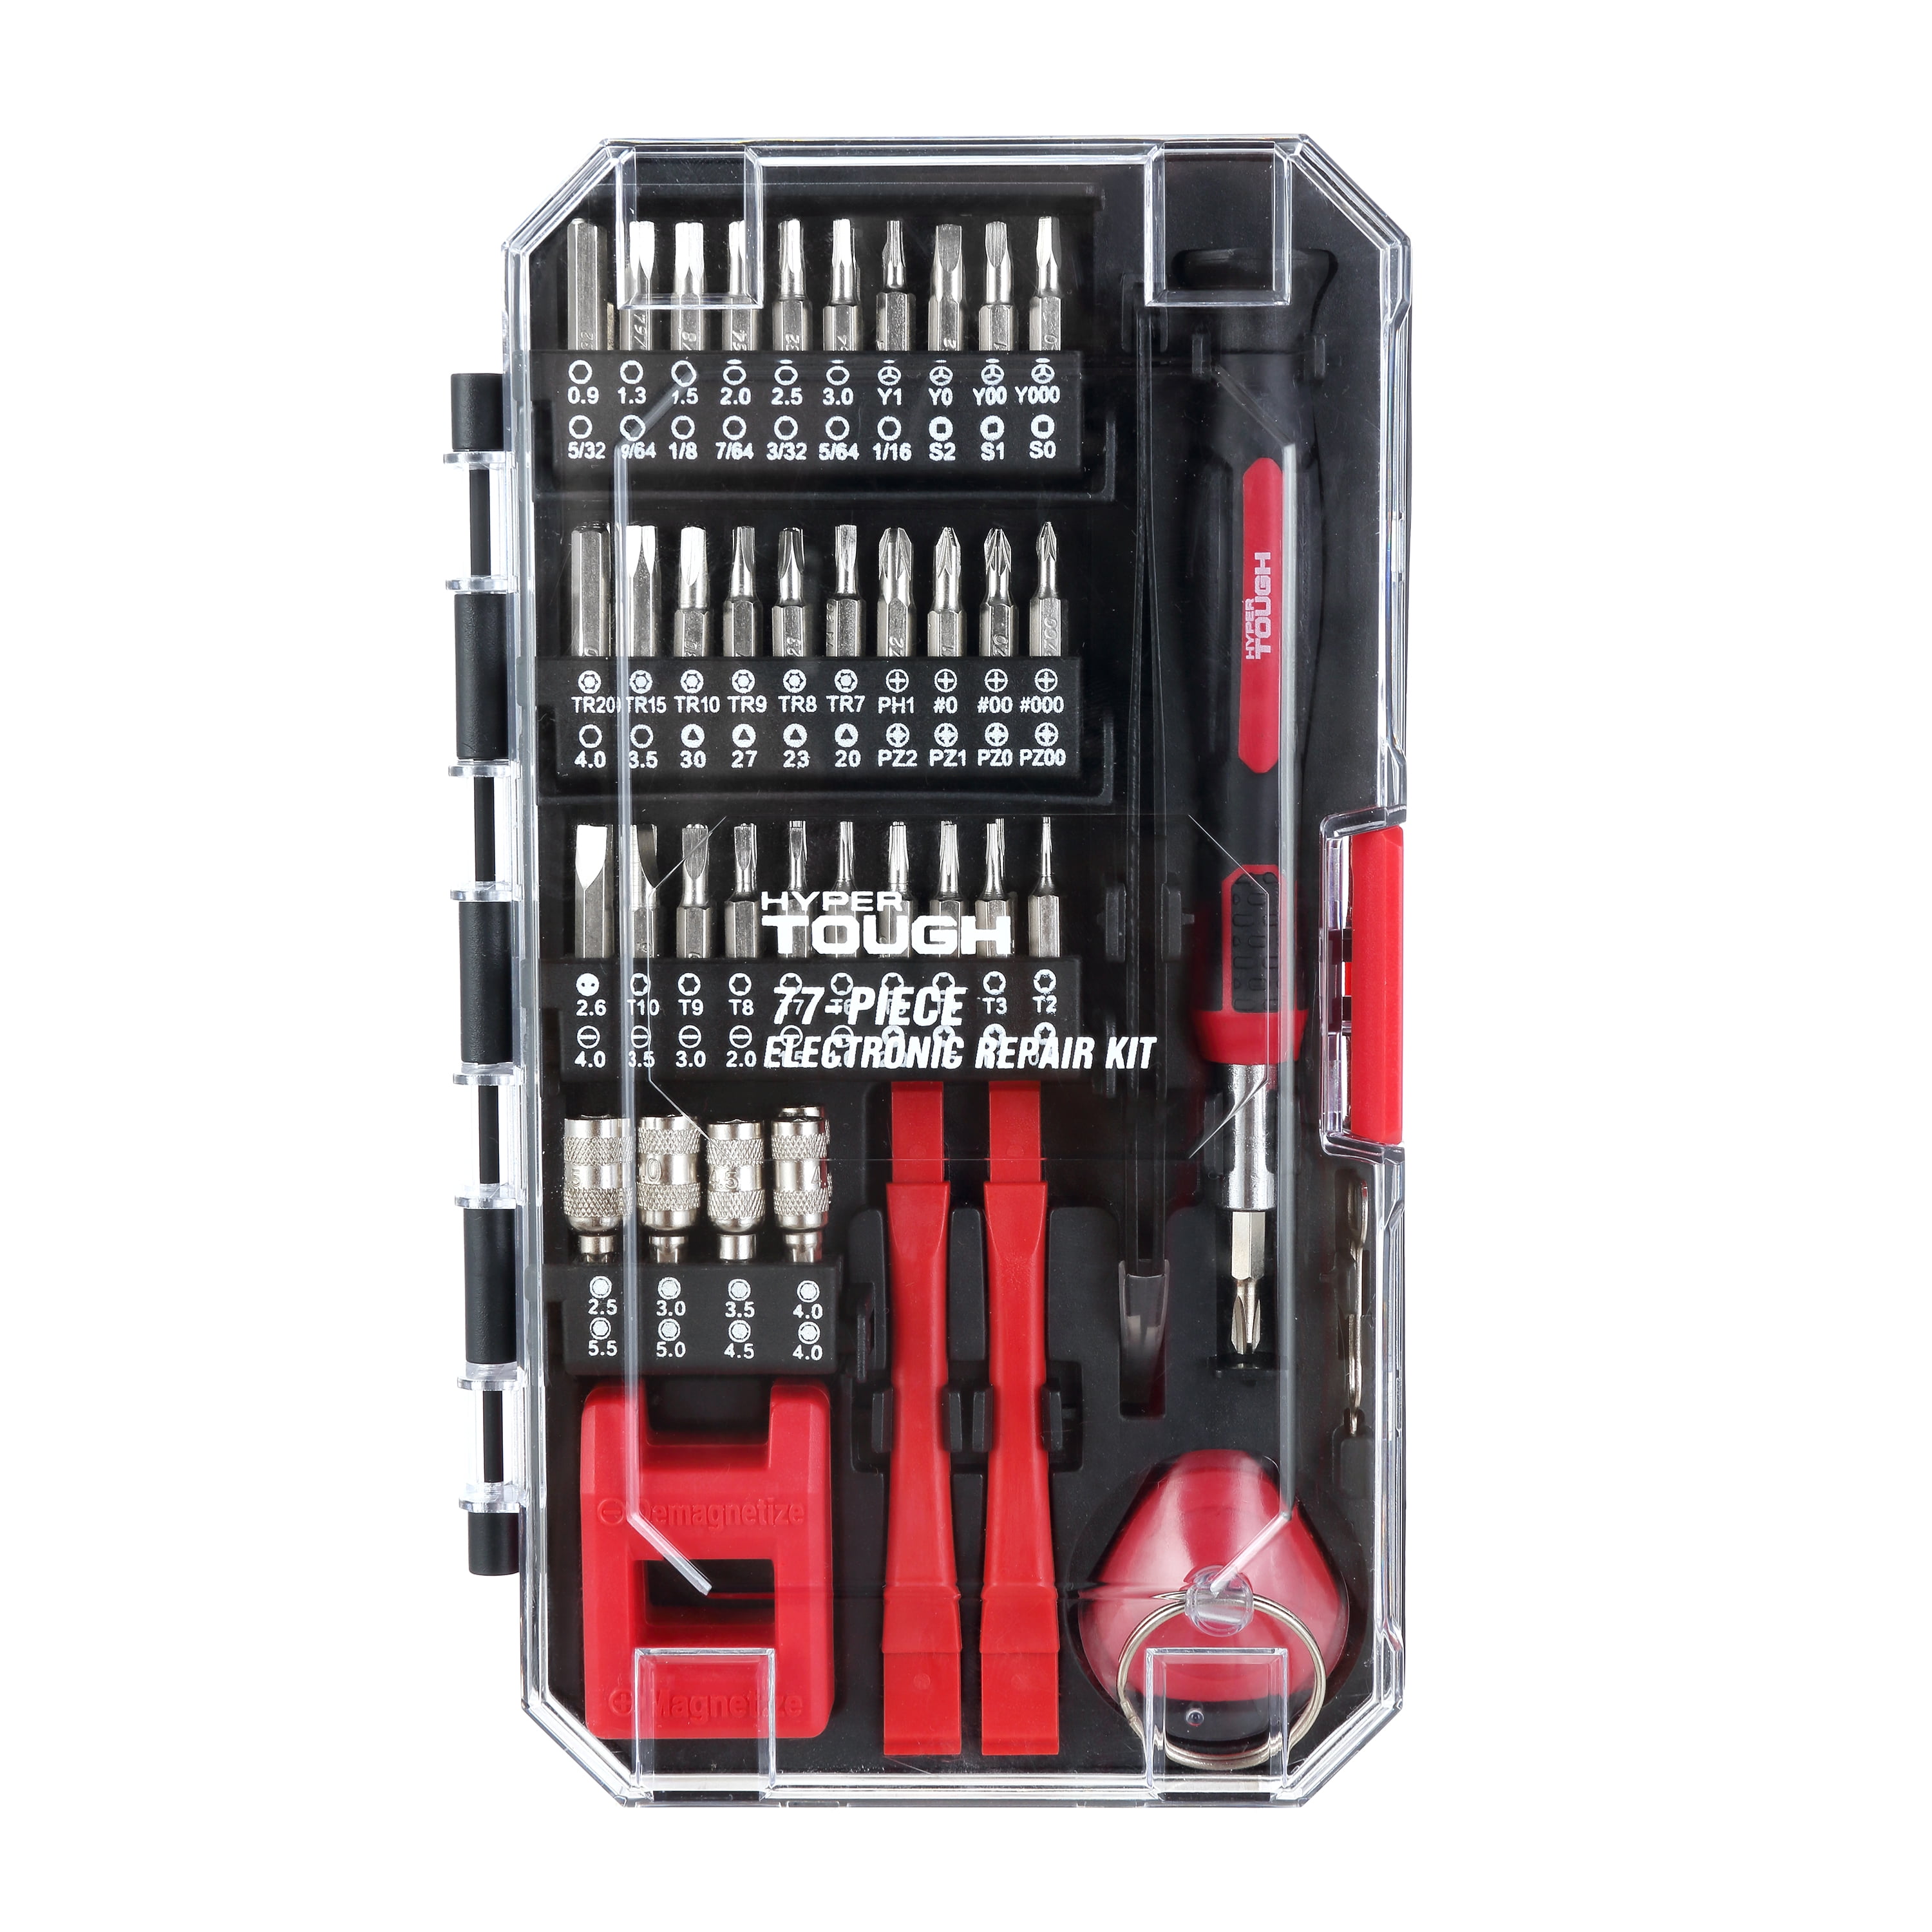 89 in 1 with 54 Magnetic Precision Driver Bits Screwdriver Screwdriver Set